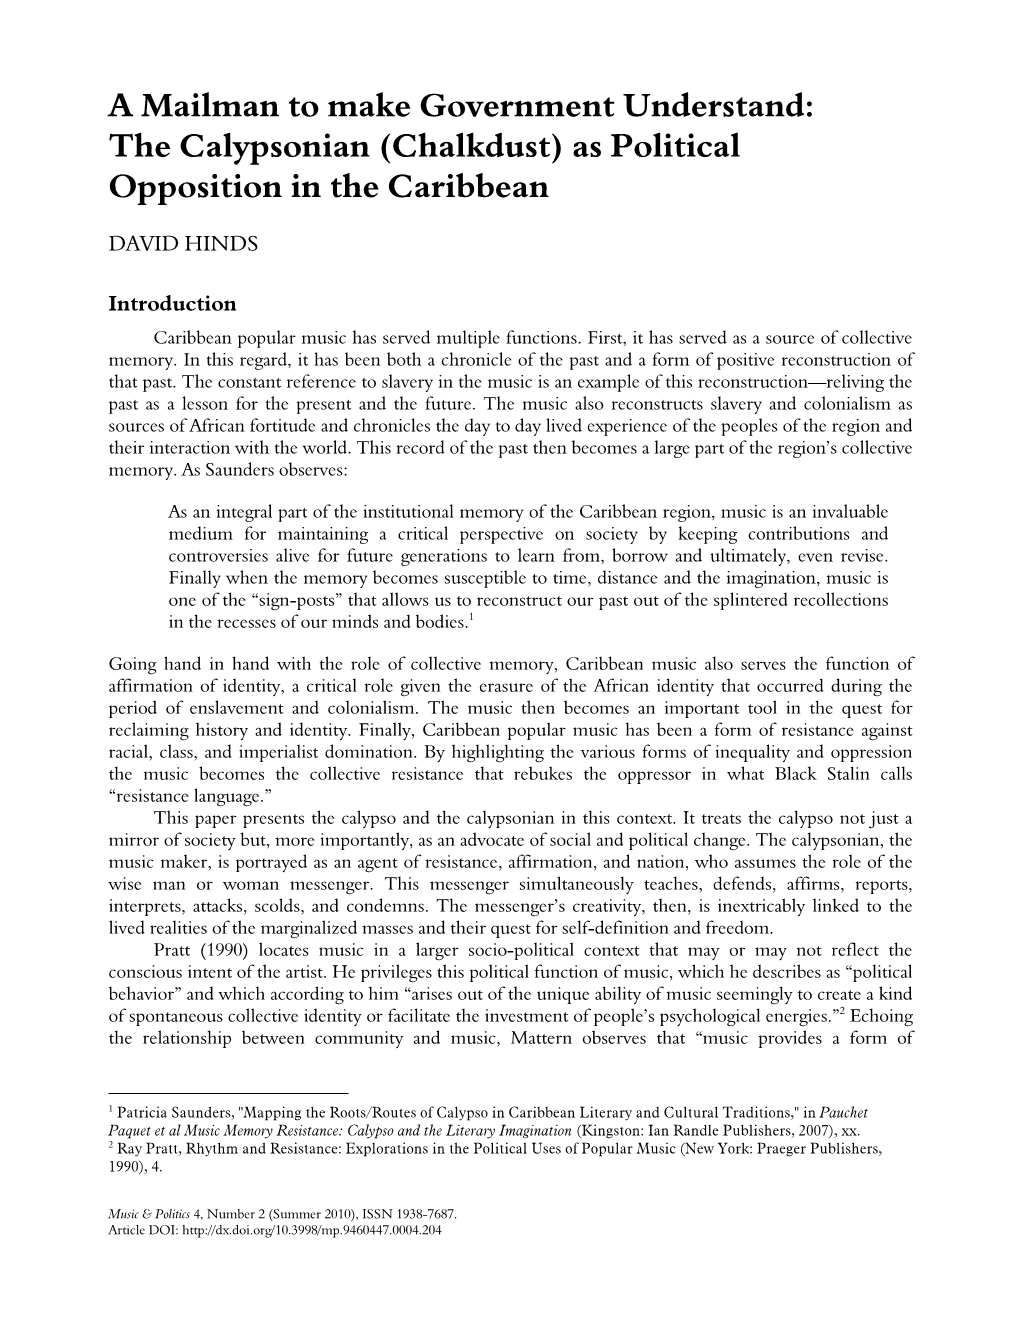 The Calypsonian (Chalkdust) As Political Opposition in the Caribbean